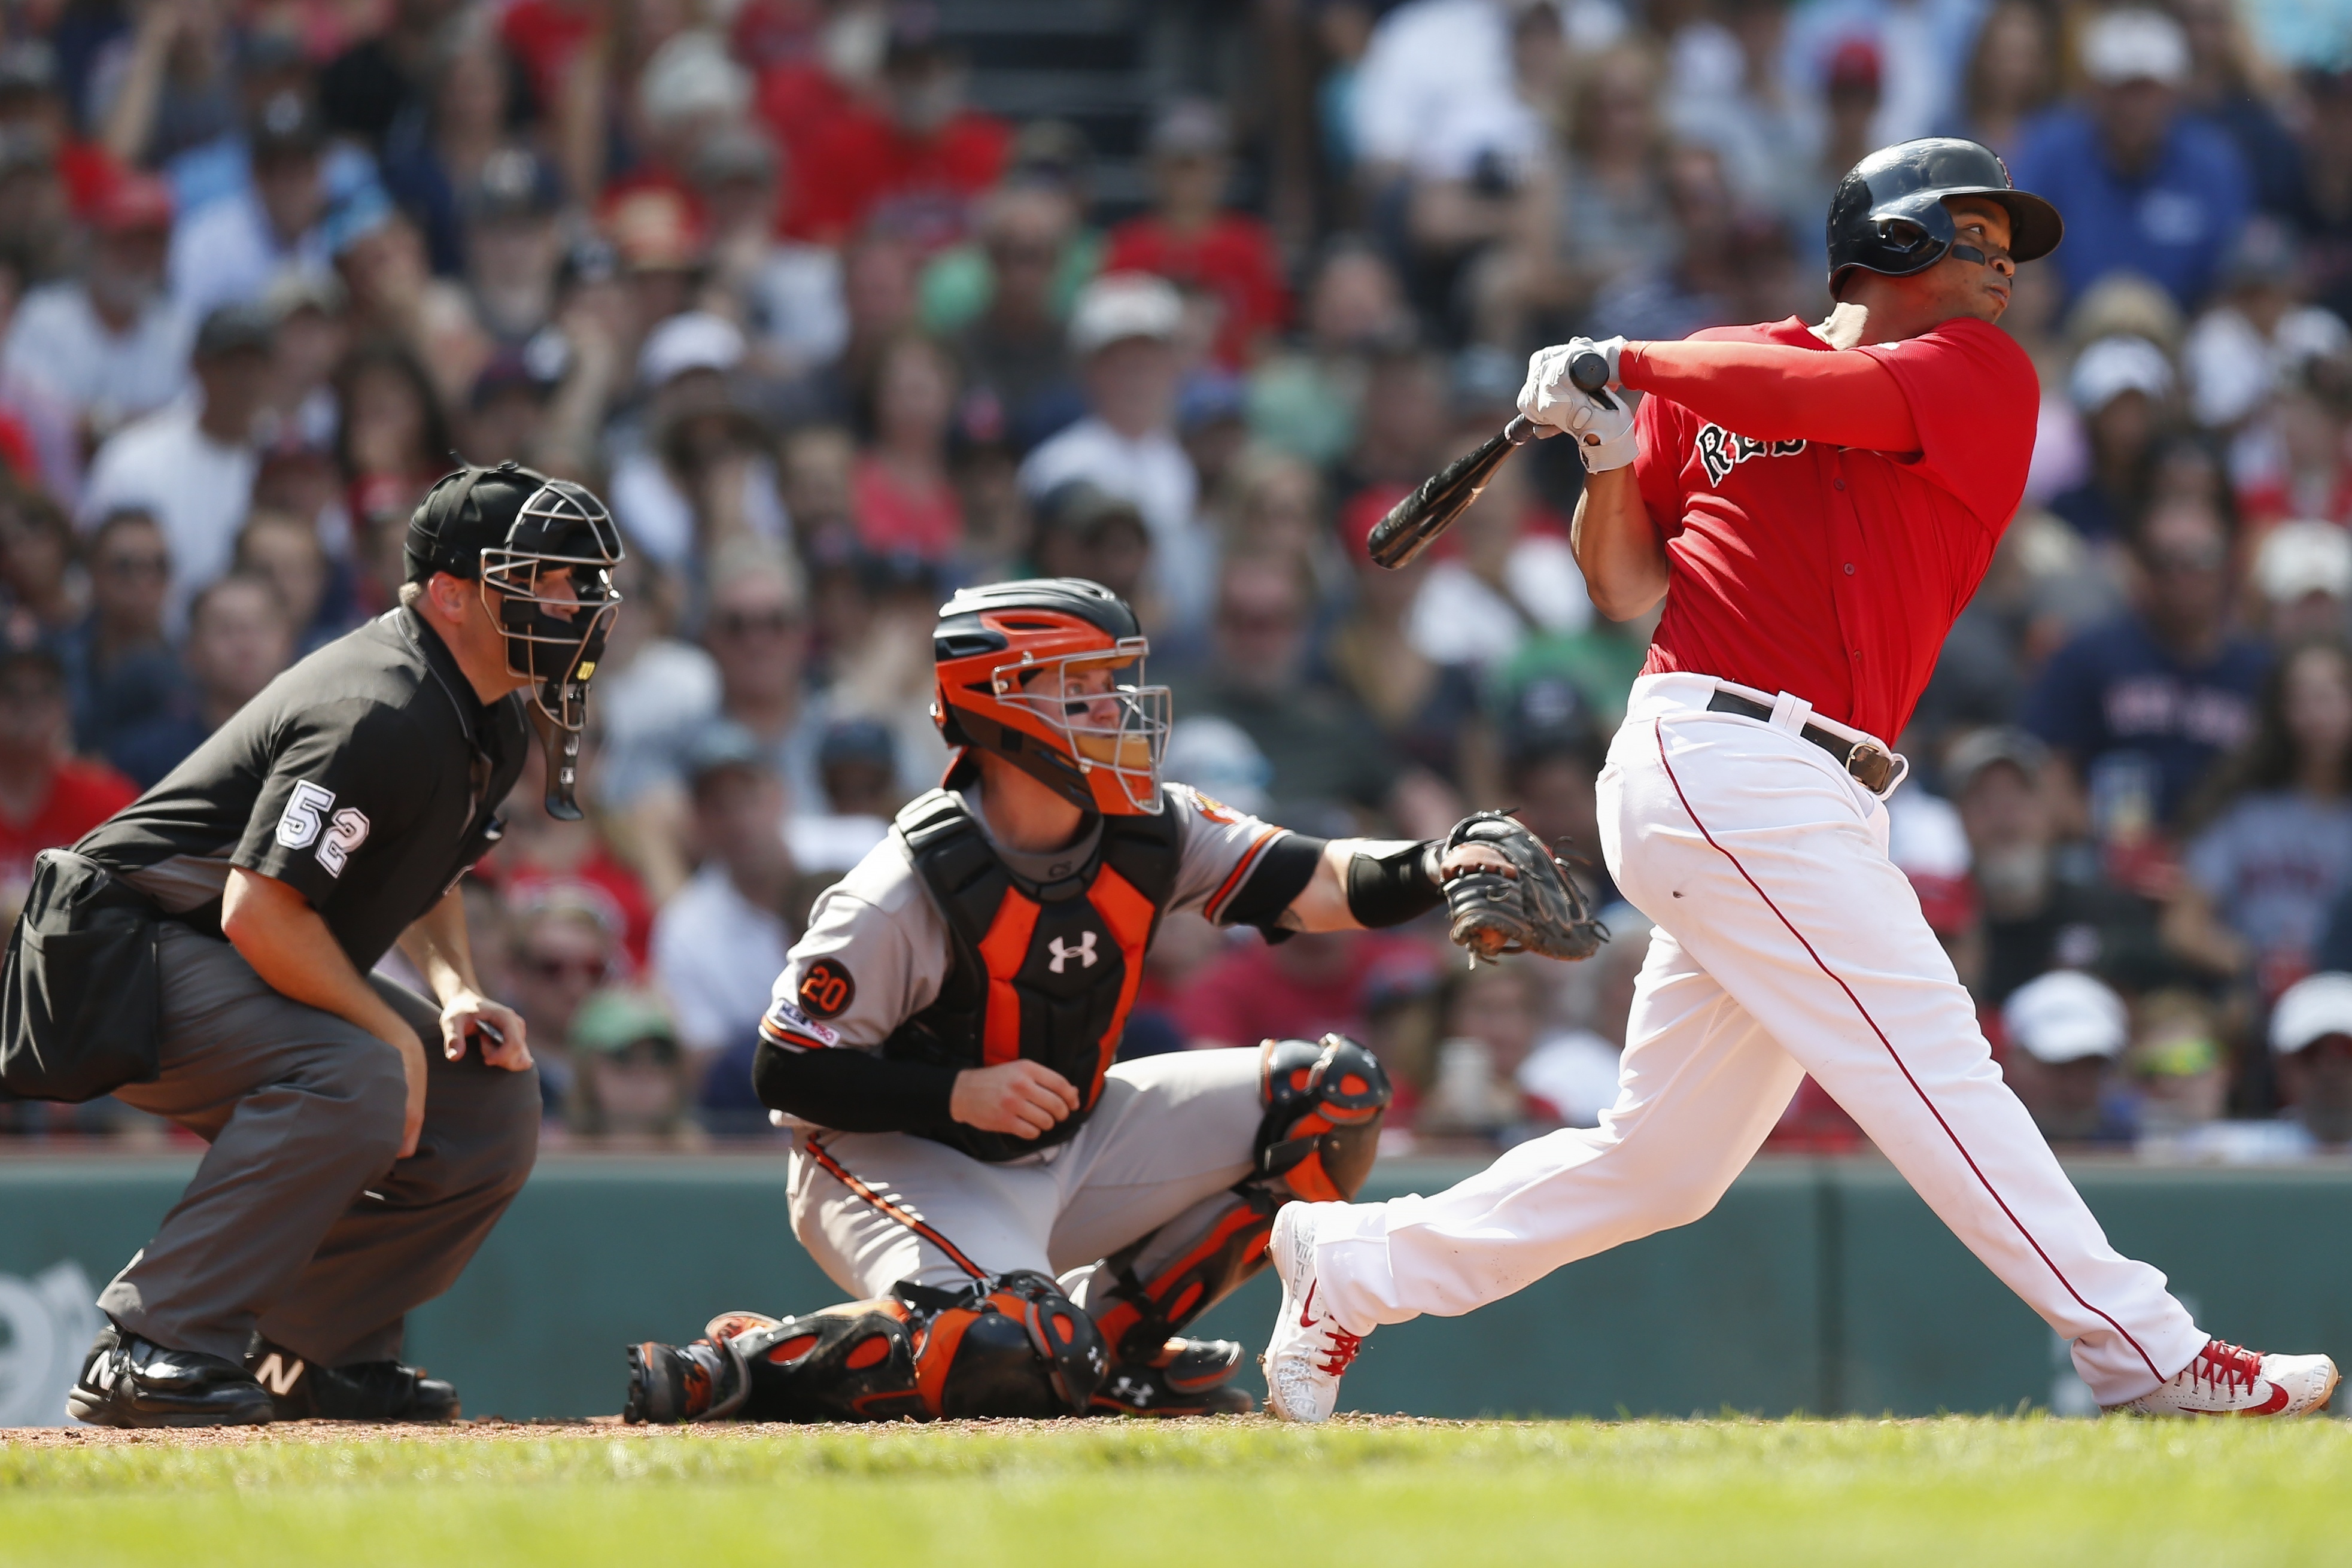 Red-hot Devers helps Red Sox rally past Orioles, 13-7